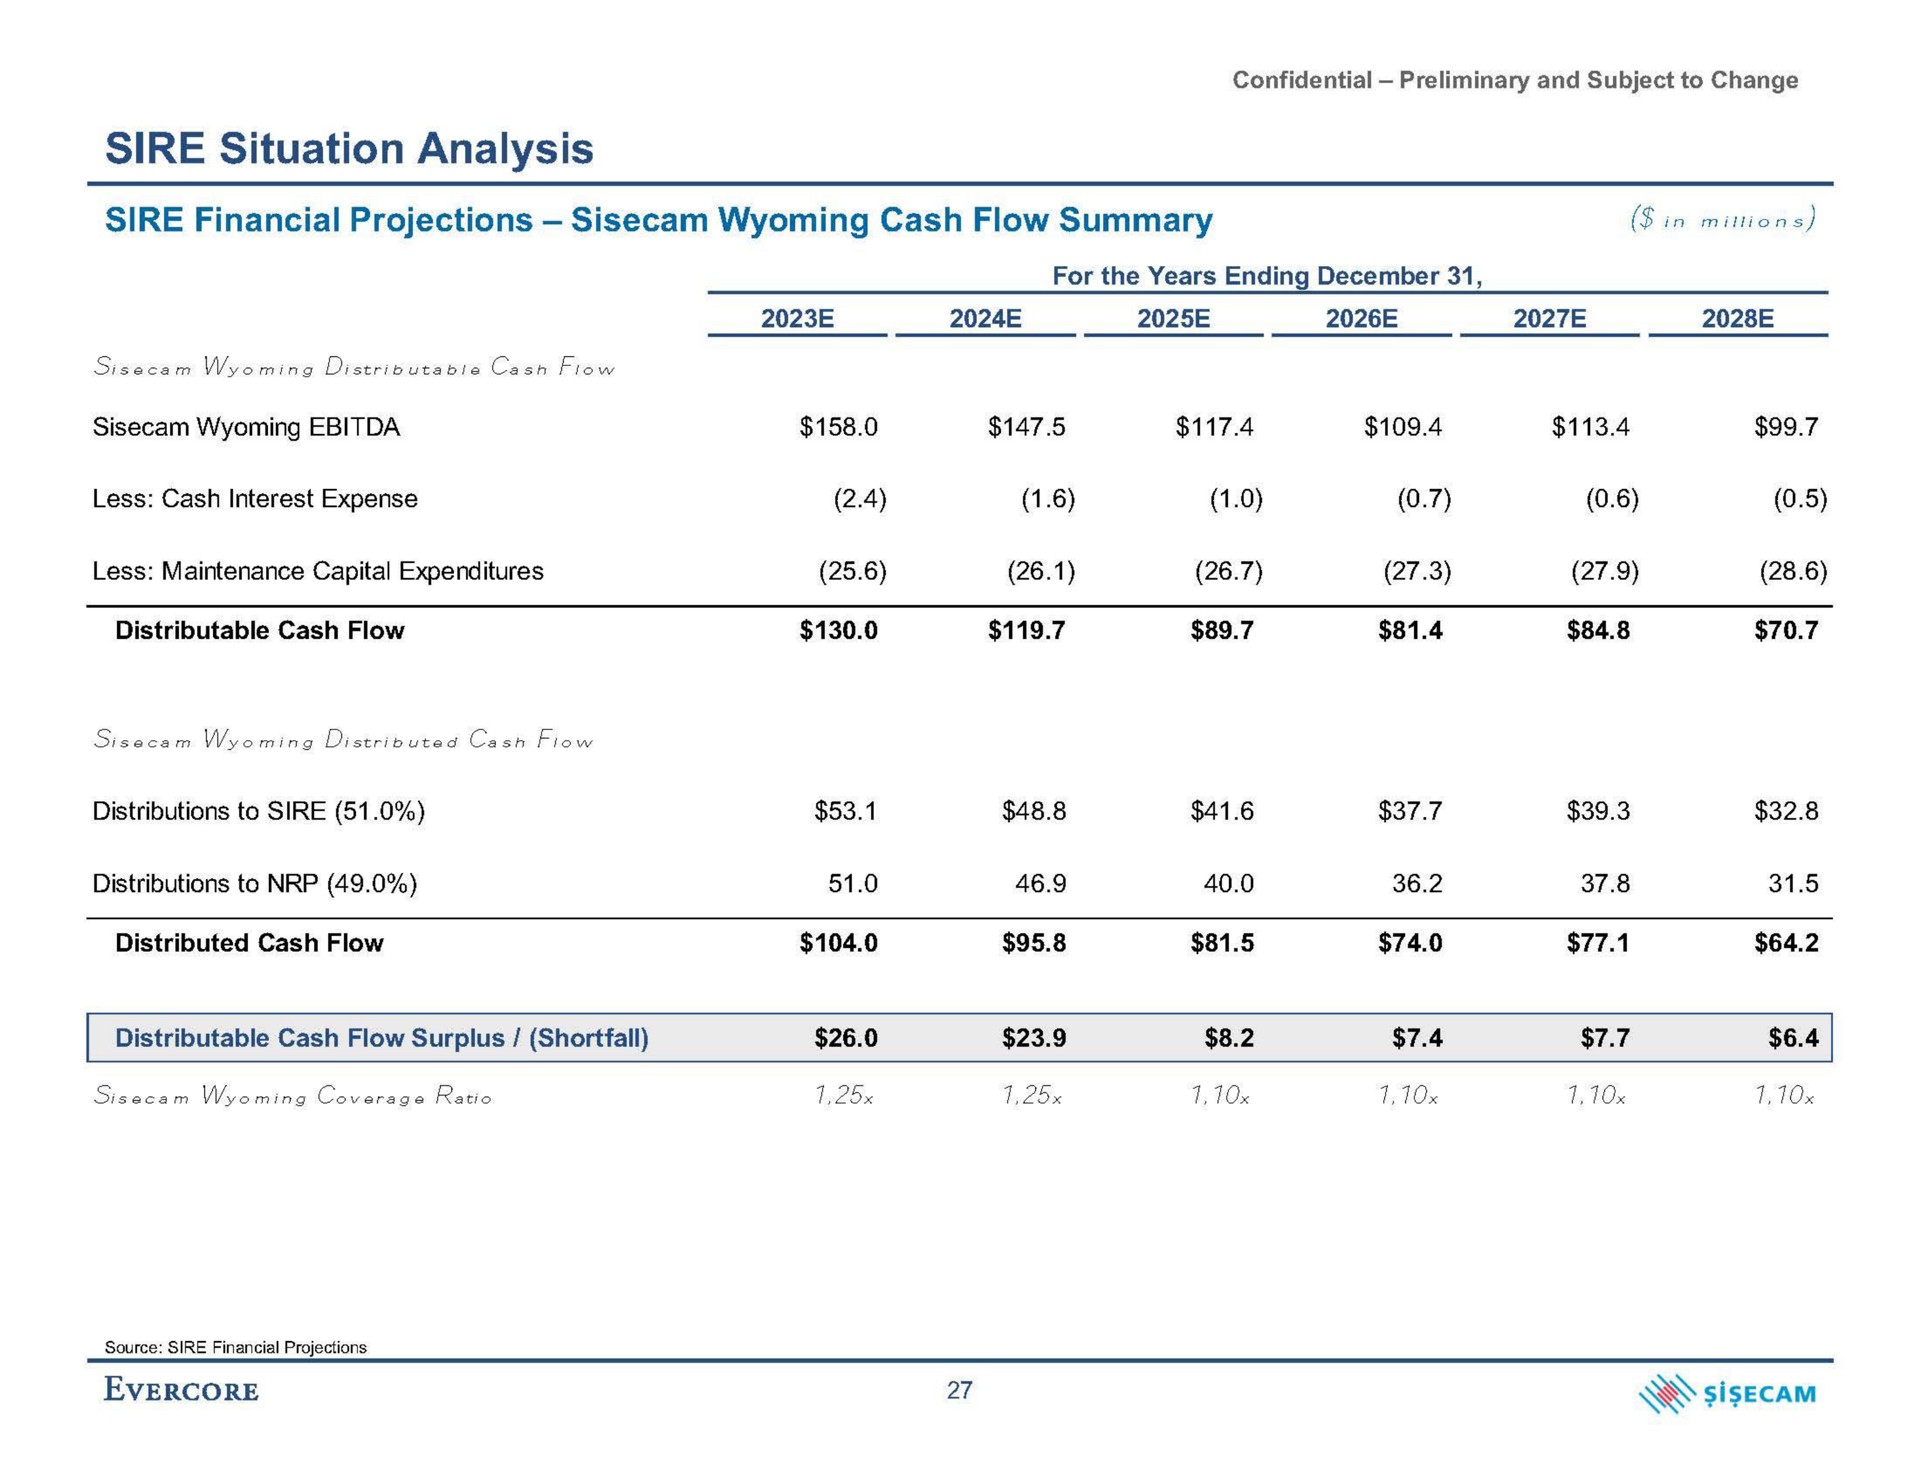 sire situation analysis sire financial projections cash flow summary in | Evercore